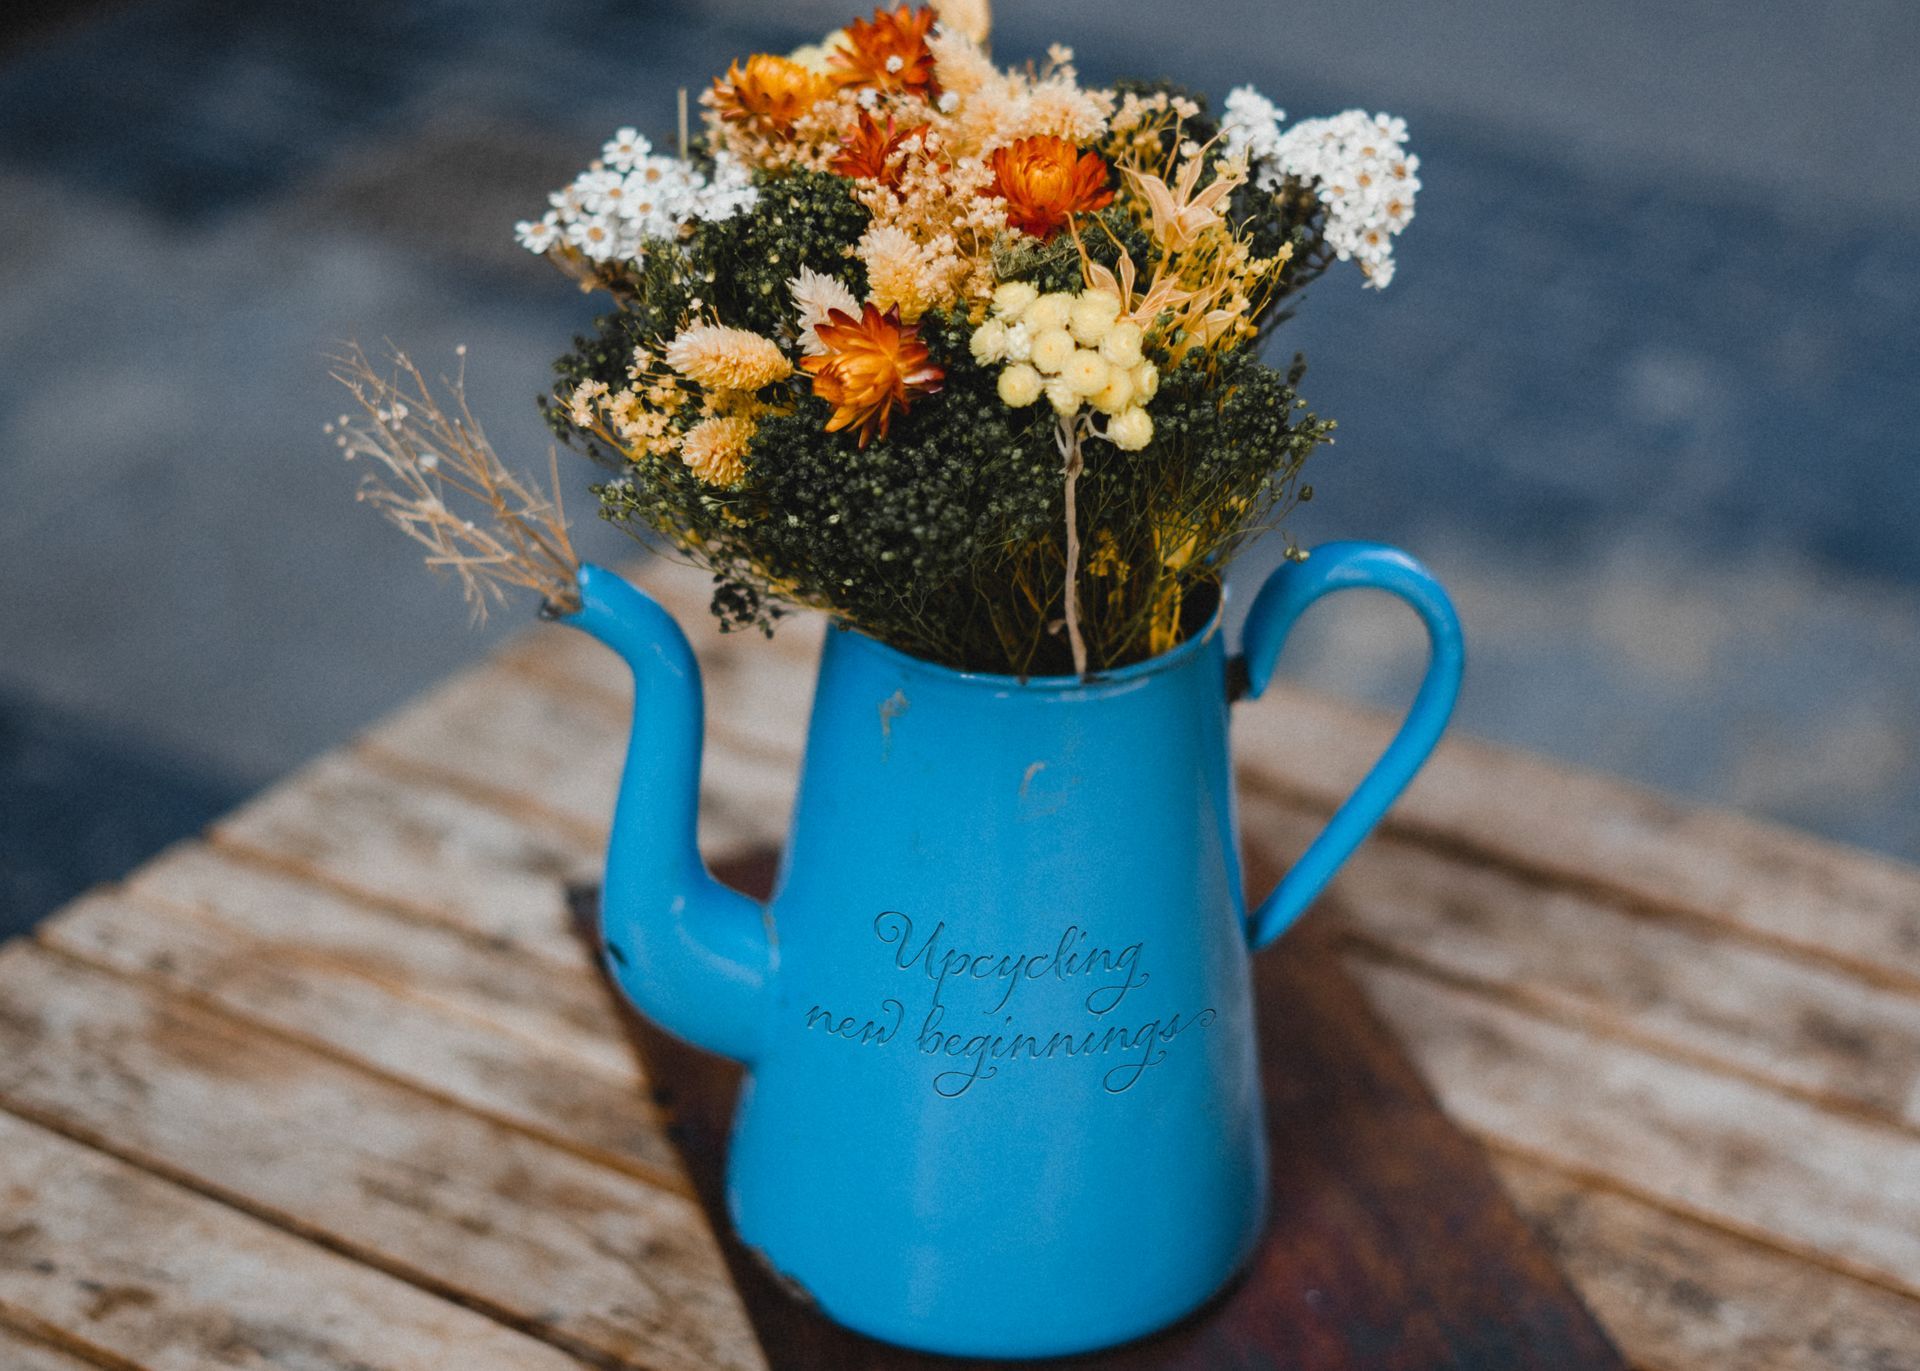 laser engraved watering can turned into a vase